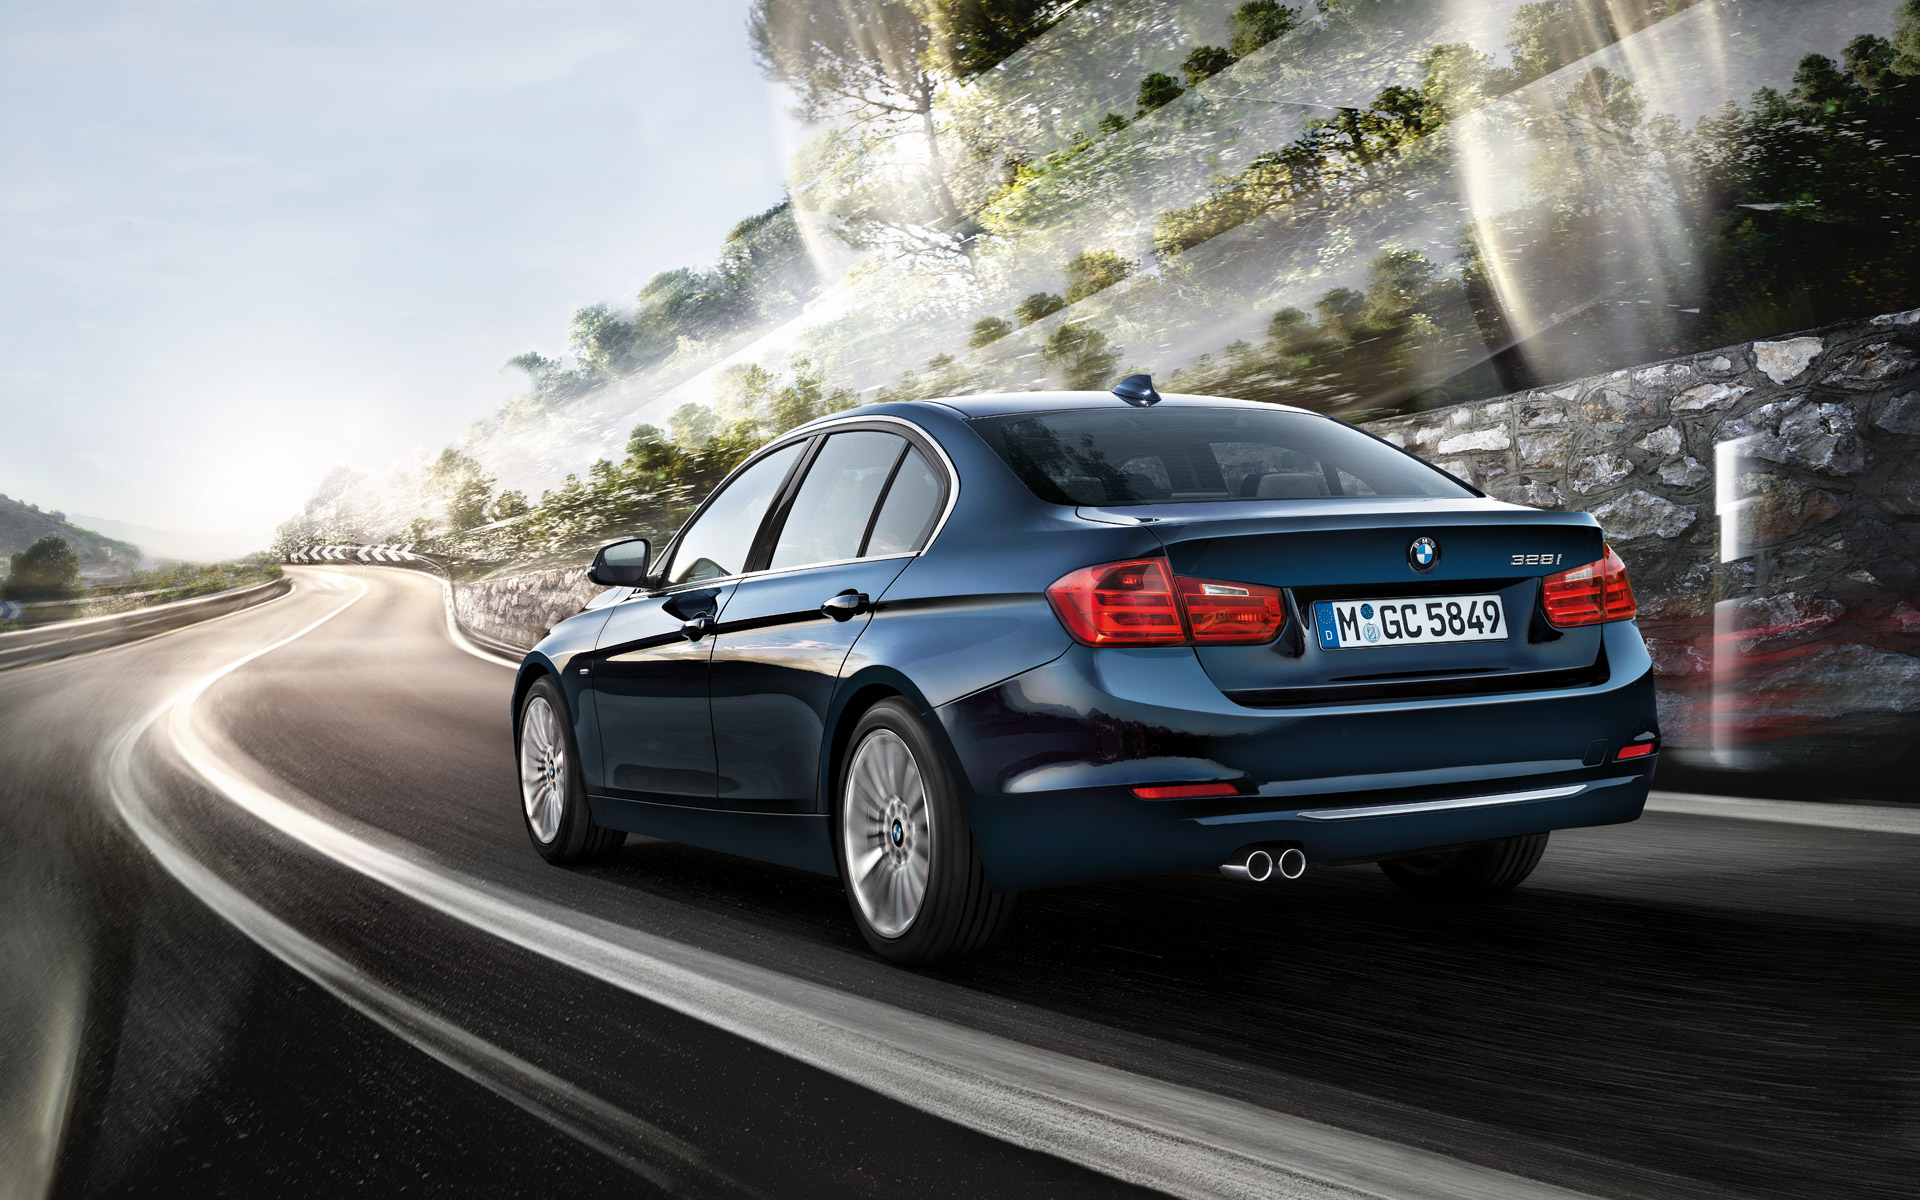 BMW 3 Series, Captivating wallpapers, Exquisite design, Perfect for BMW lovers, 1920x1200 HD Desktop